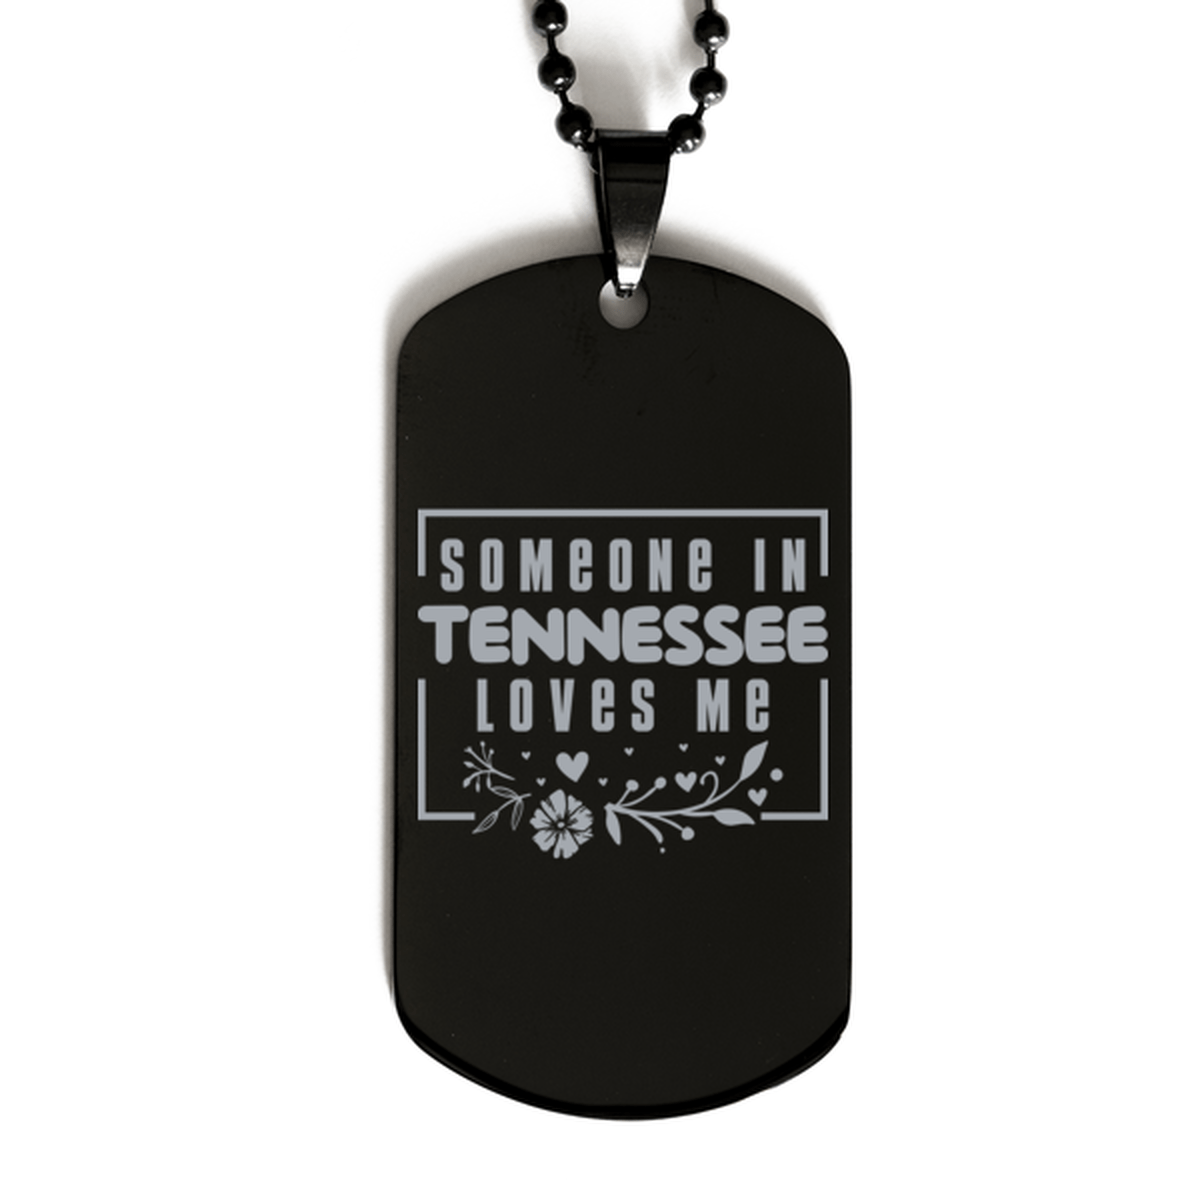 Cute Tennessee Black Dog Tag Necklace, Someone in Tennessee Loves Me, Best Birthday Gifts from Tennessee Friends & Family